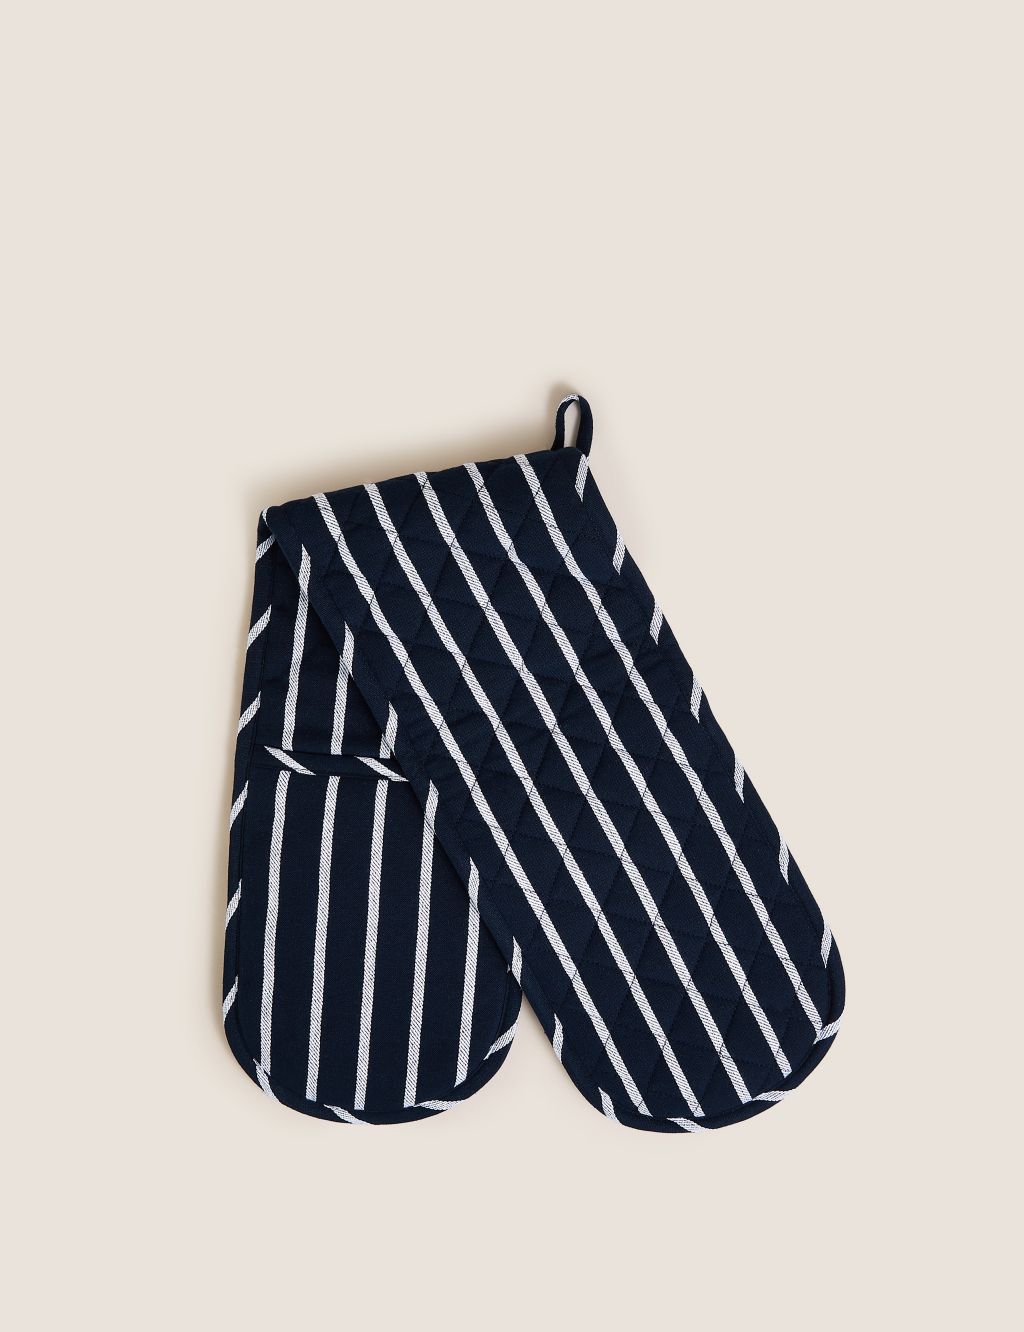 Striped Double Oven Glove image 2